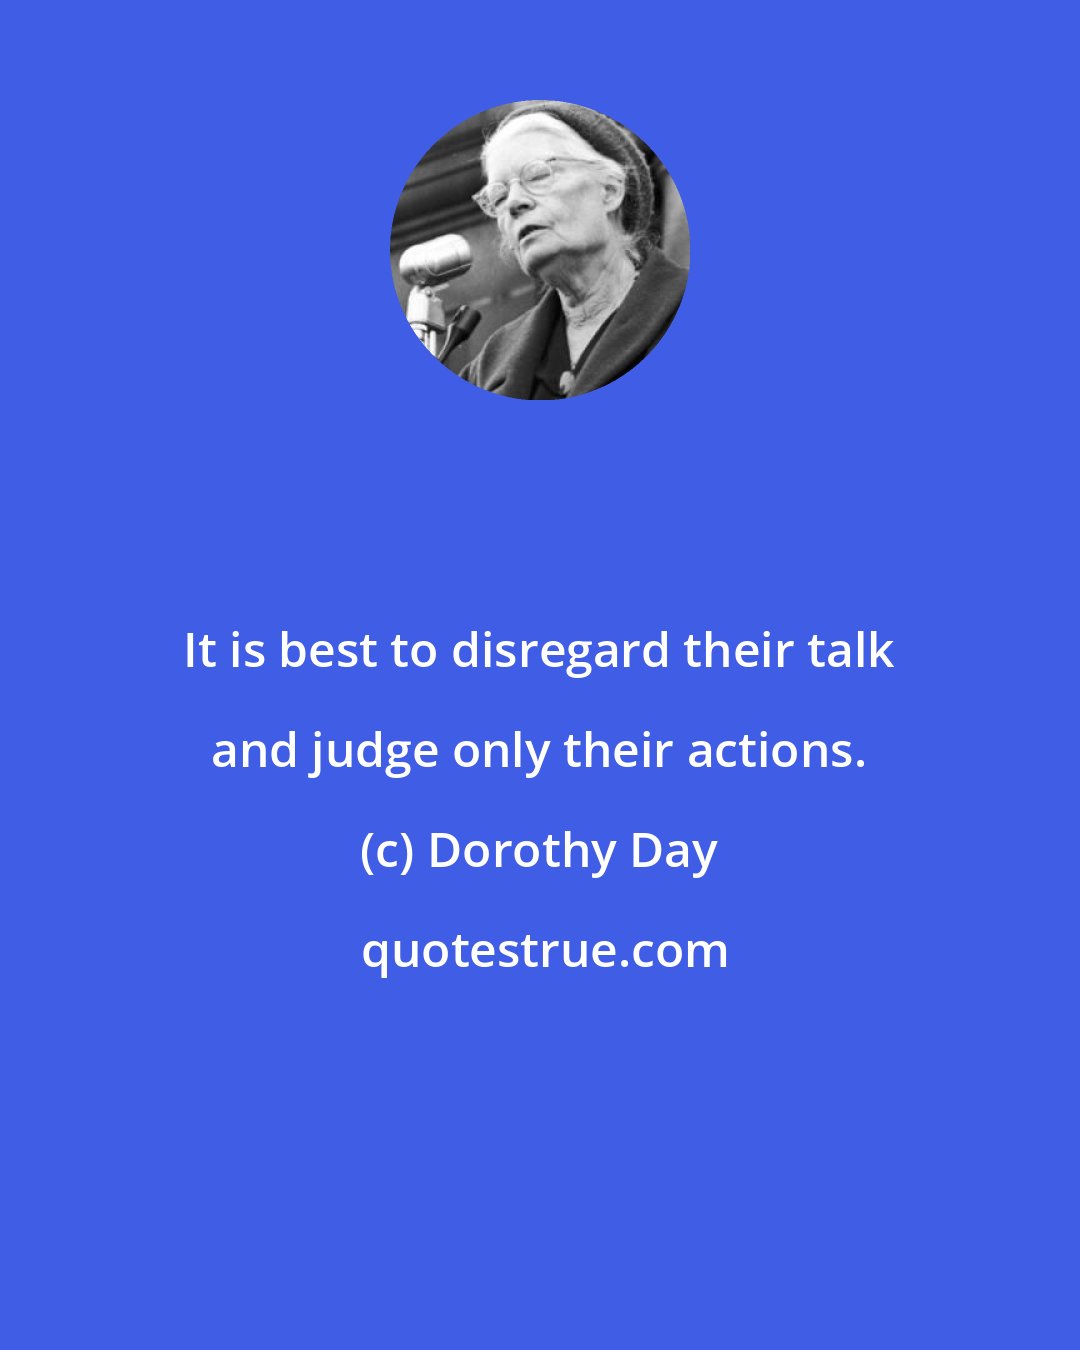 Dorothy Day: It is best to disregard their talk and judge only their actions.